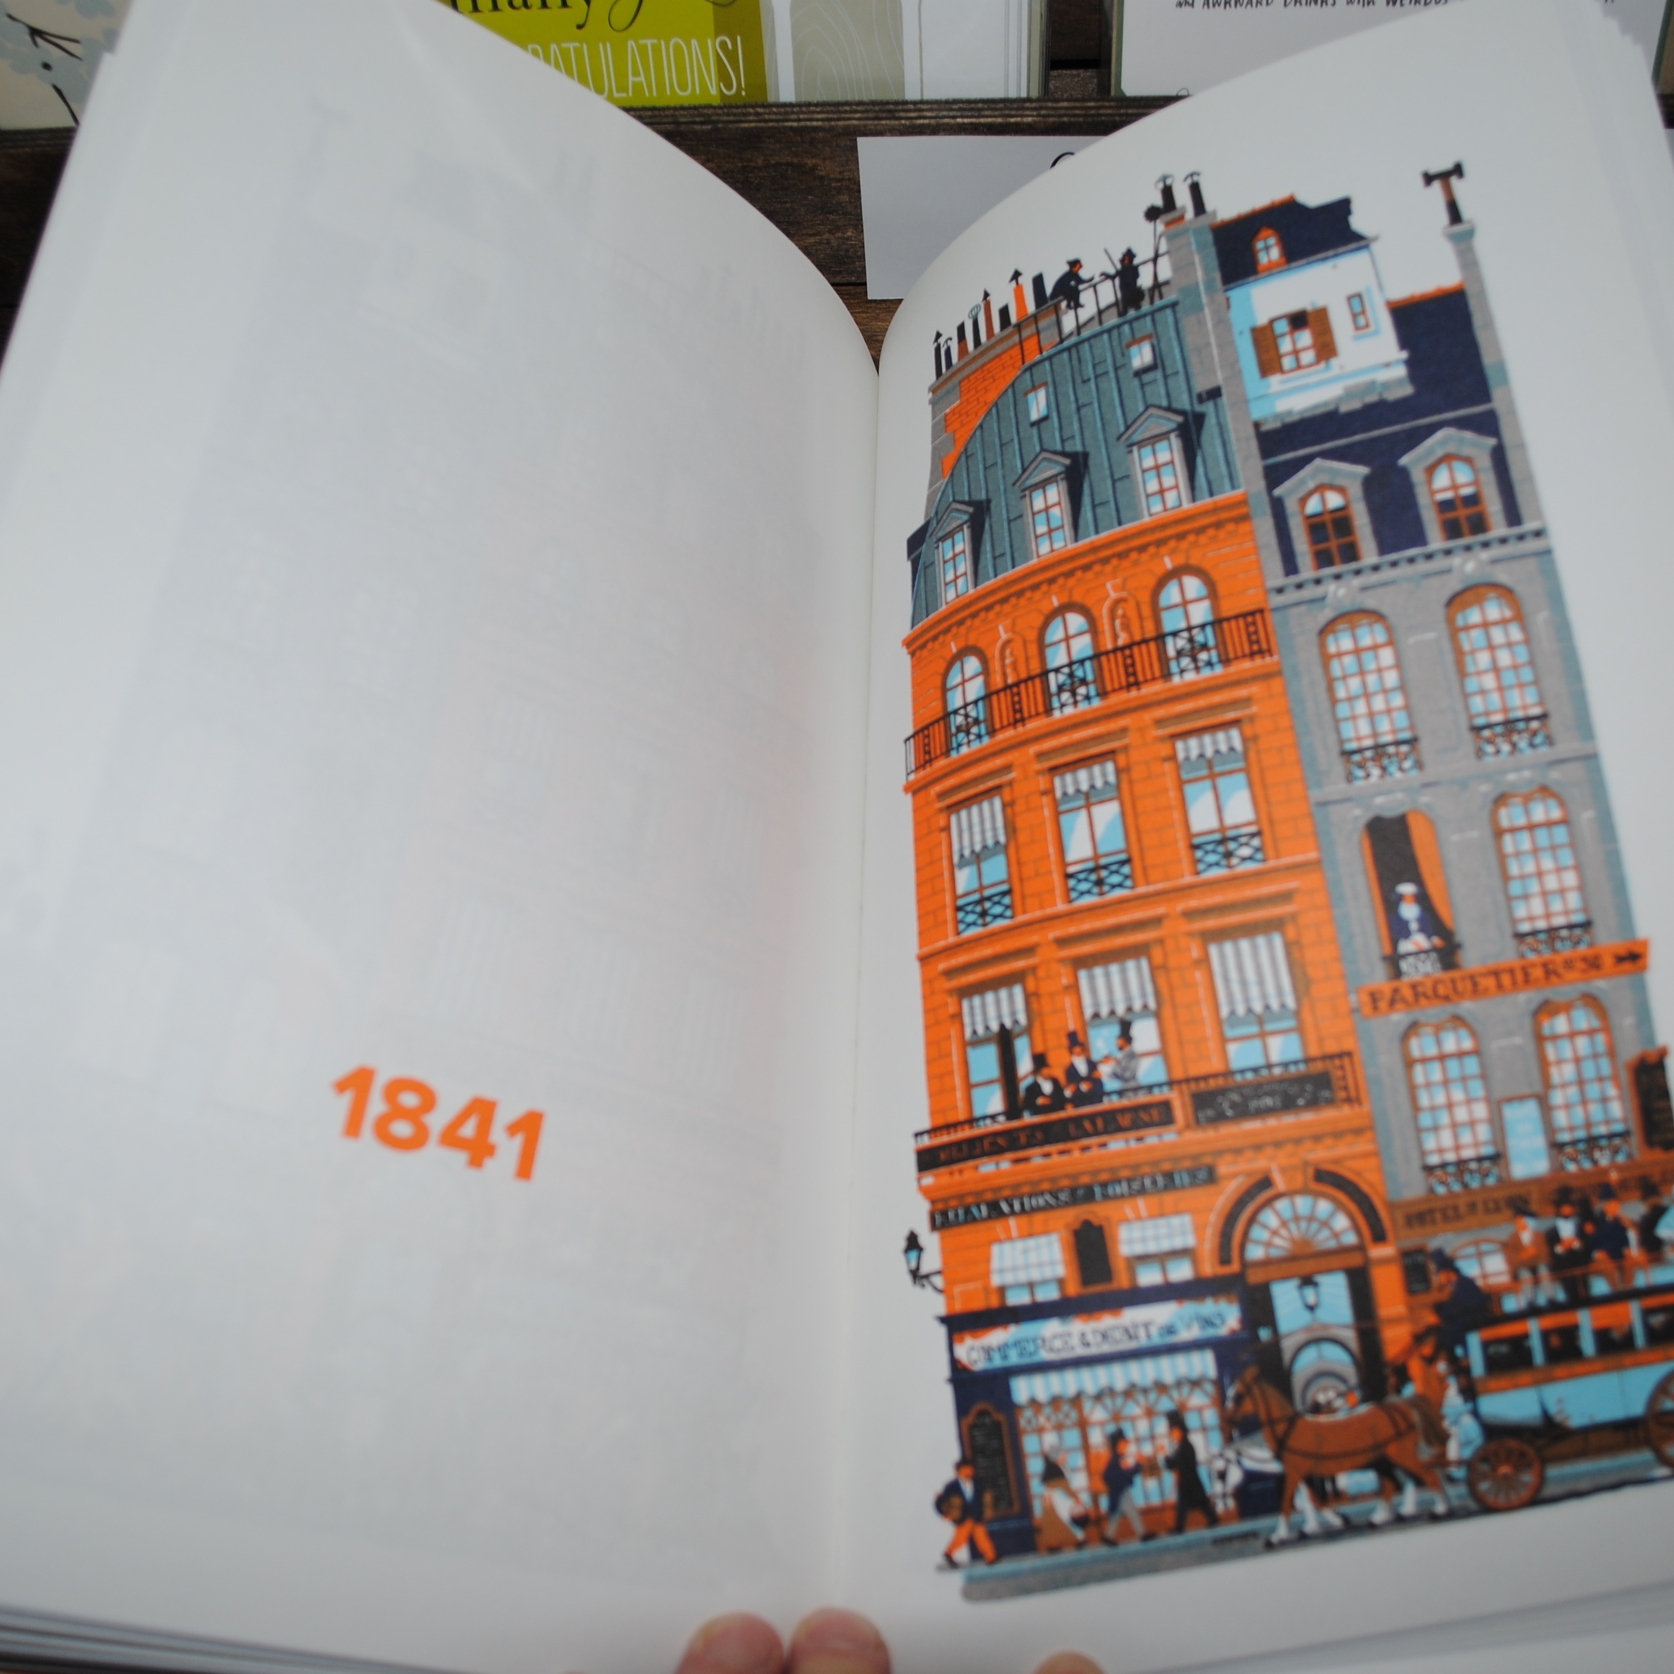 750 Years in Paris book at The Prints and the Paper in Edmonton on 124 street